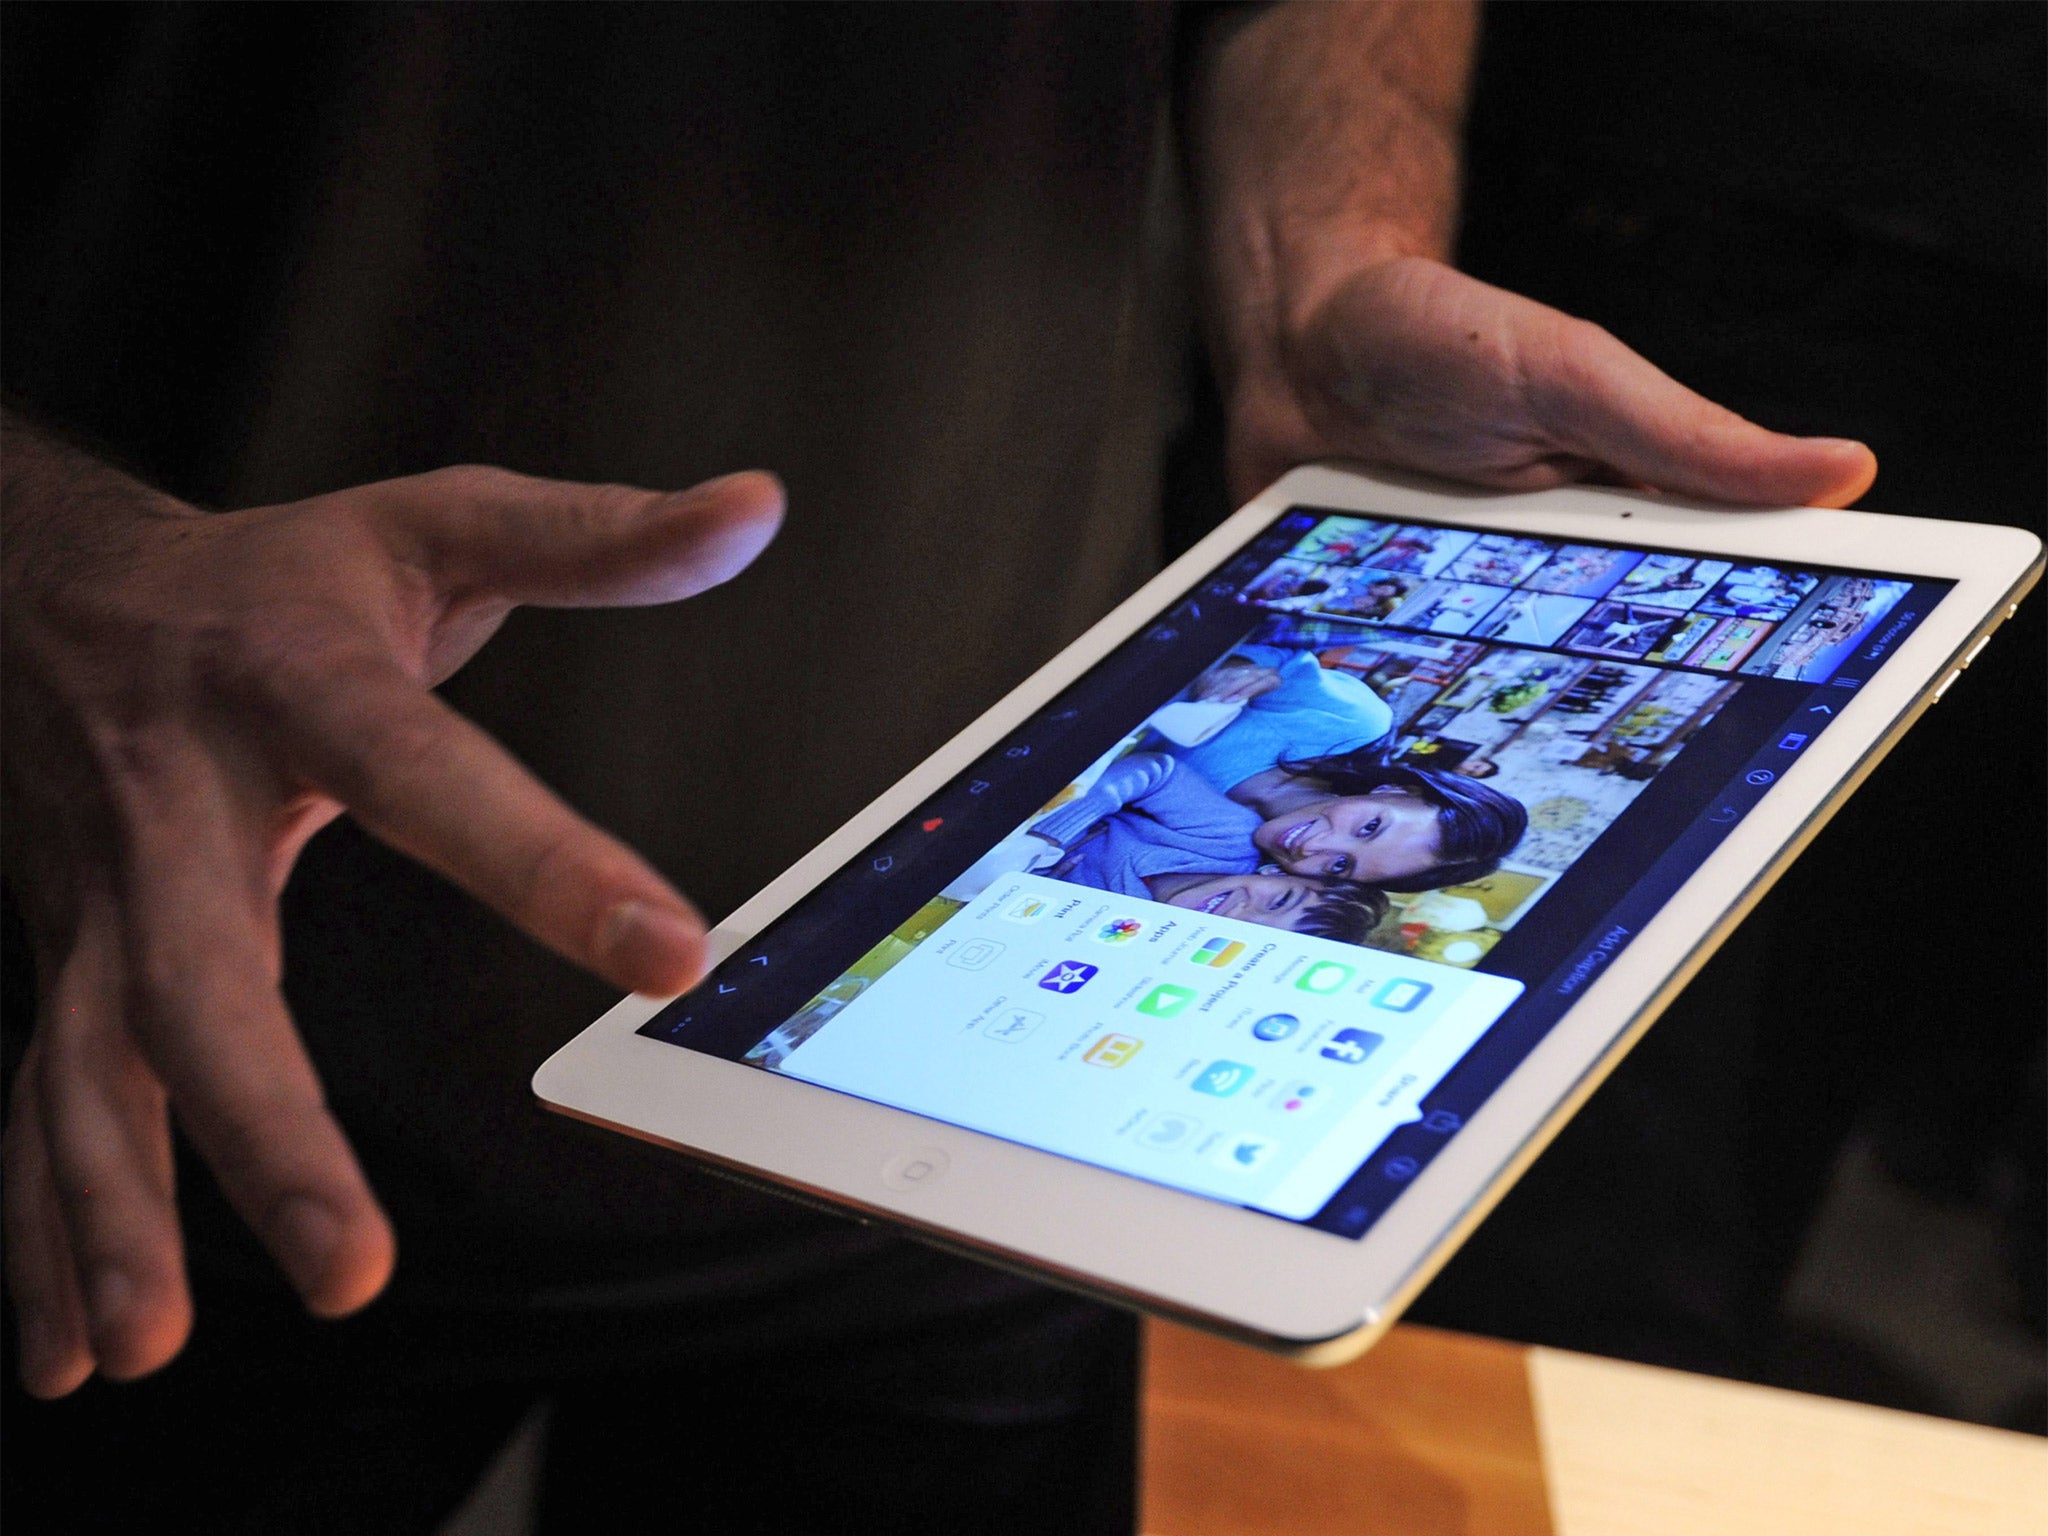 The iPad Air is the best tablet on the market